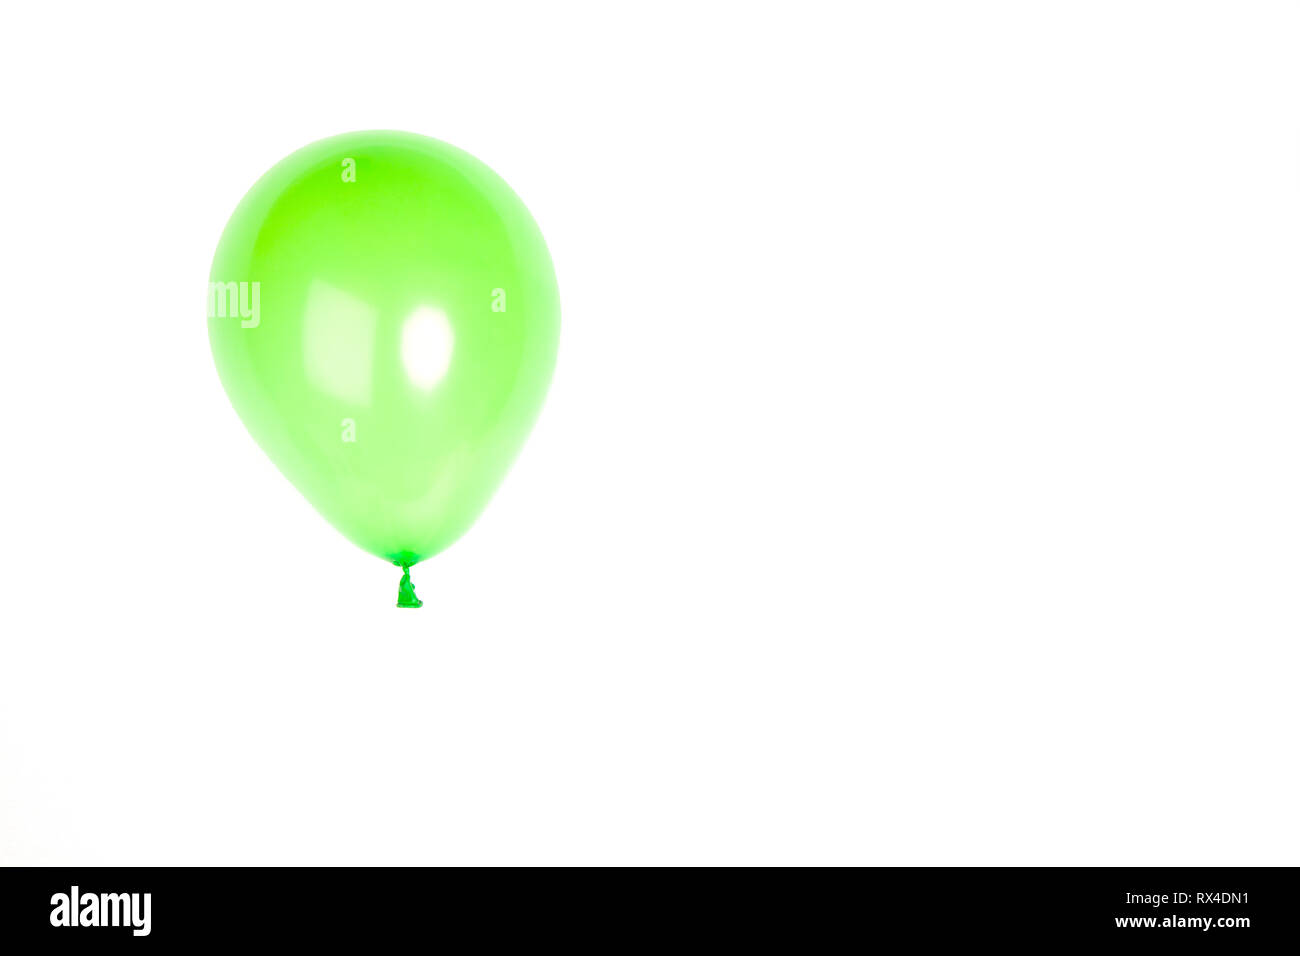 Balloon - Green balloon with invisible string, no other images